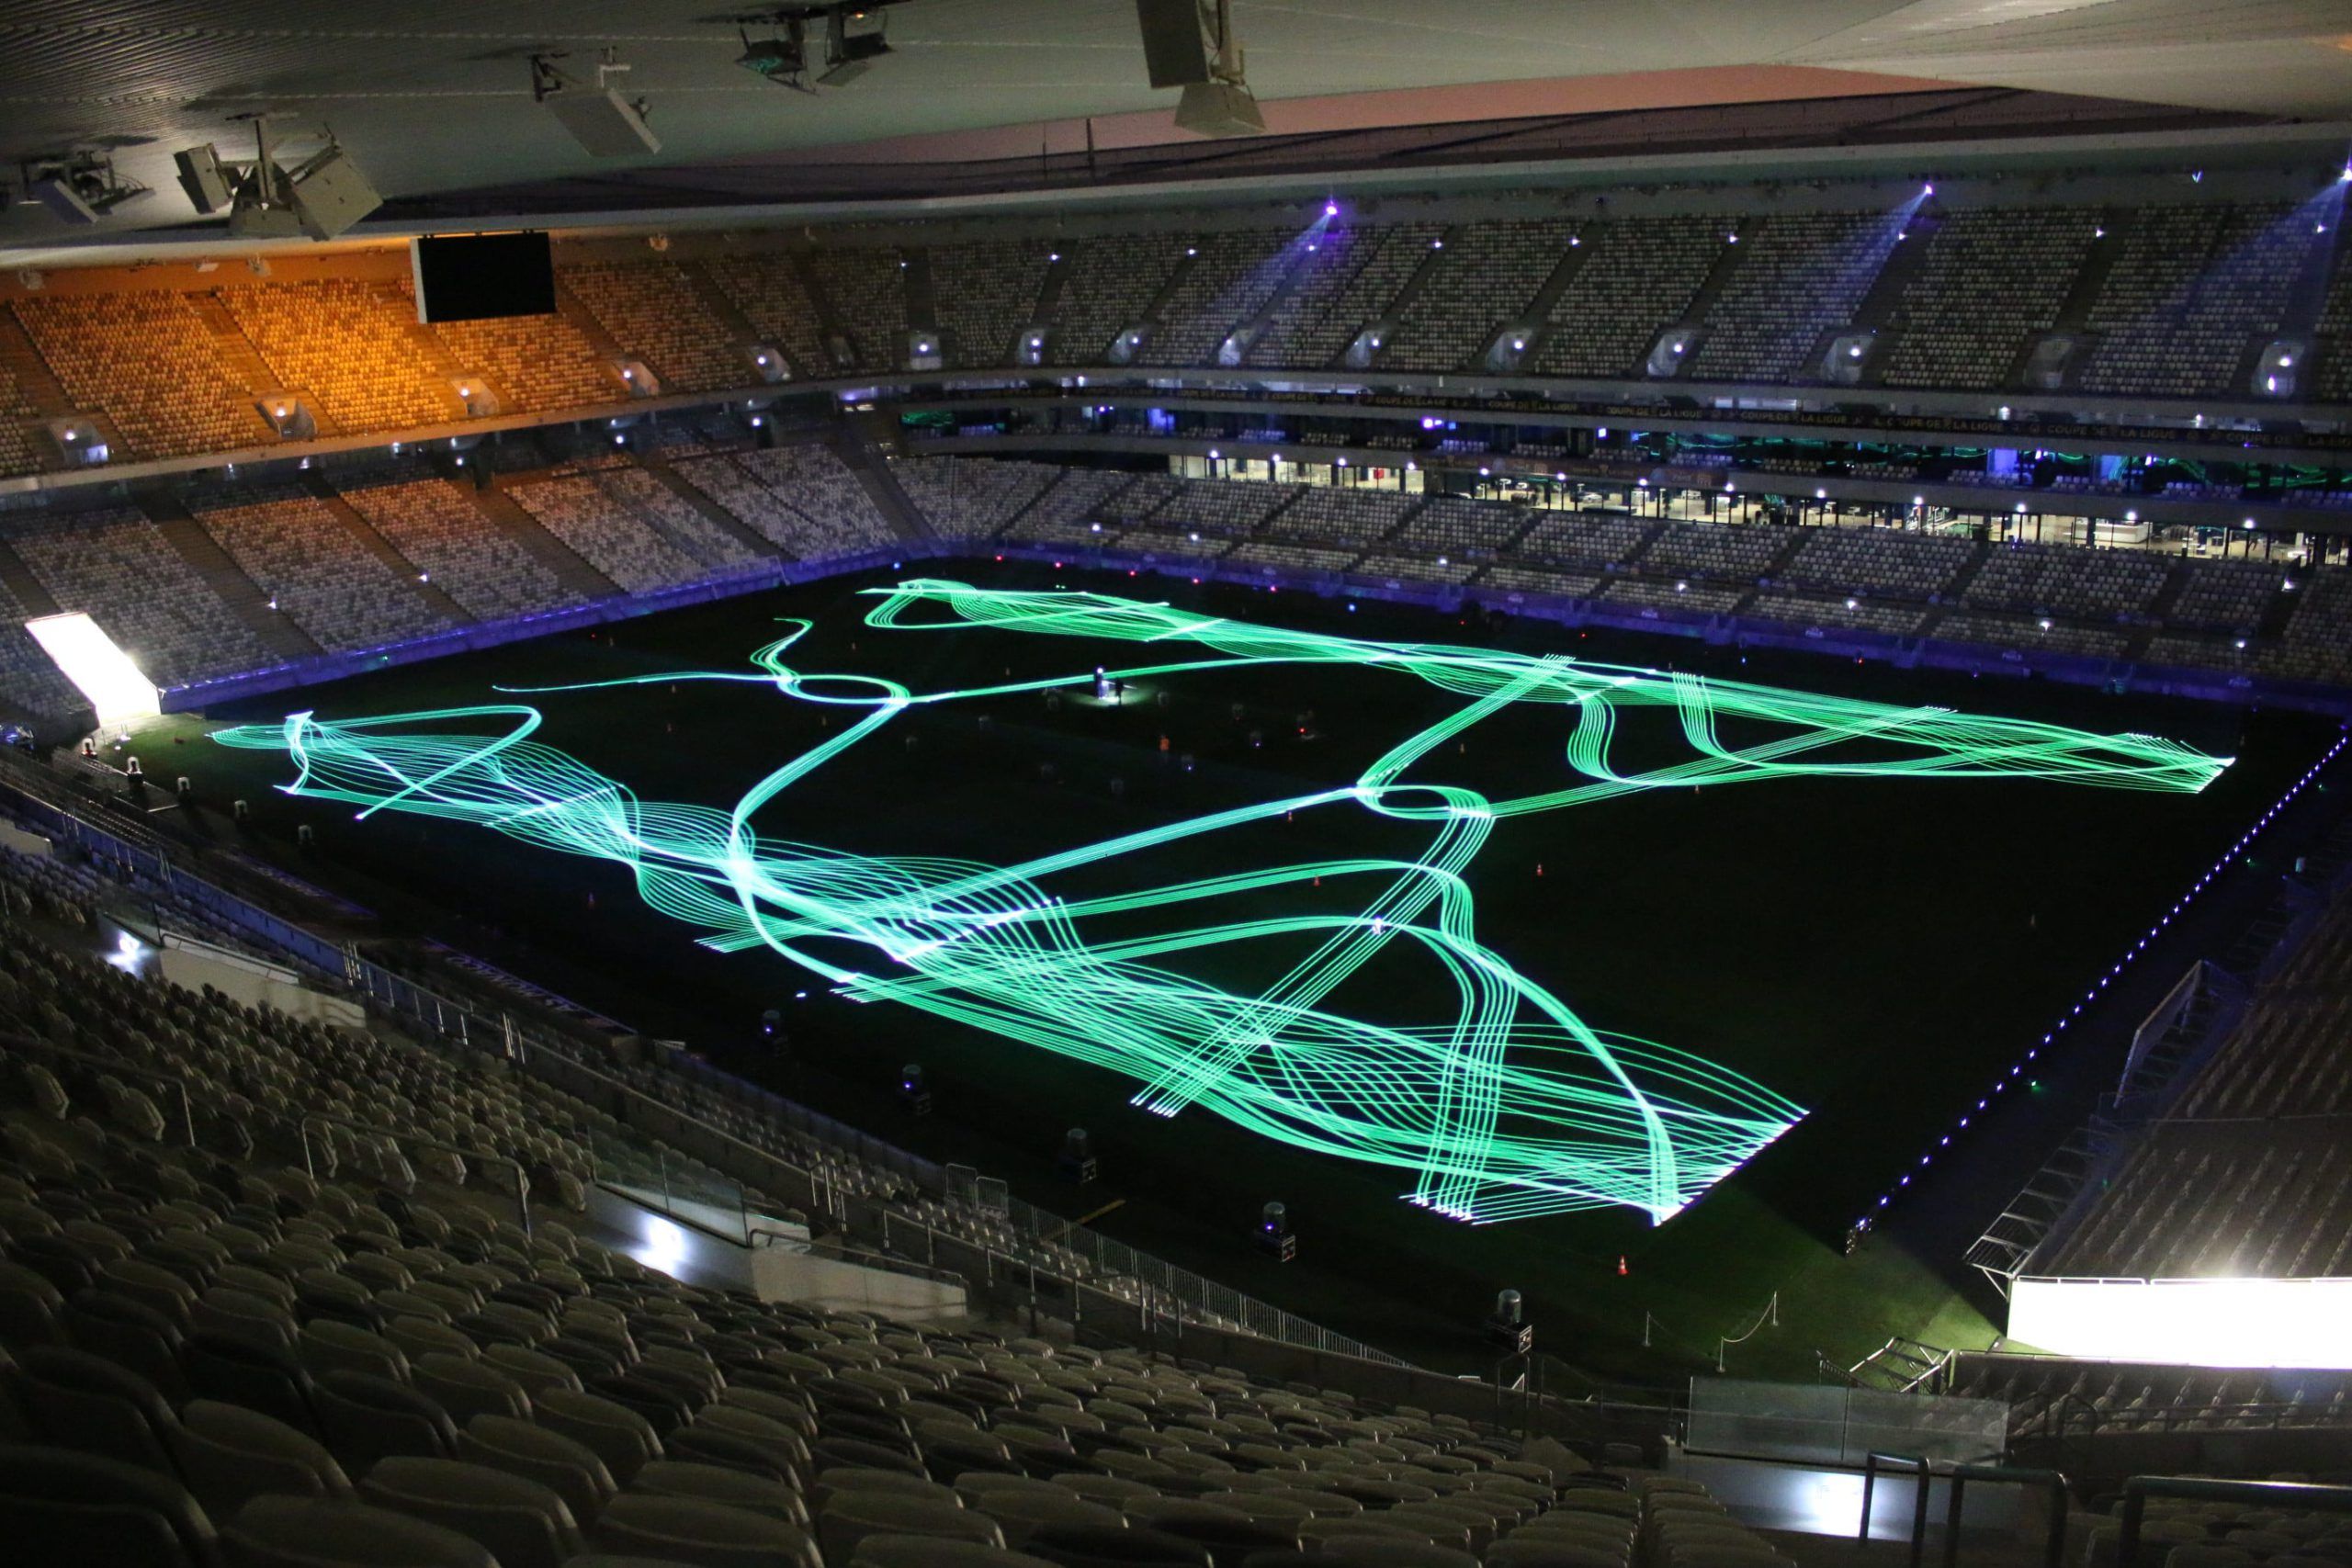 Photo of a stadium with projection of green laser shapes on it